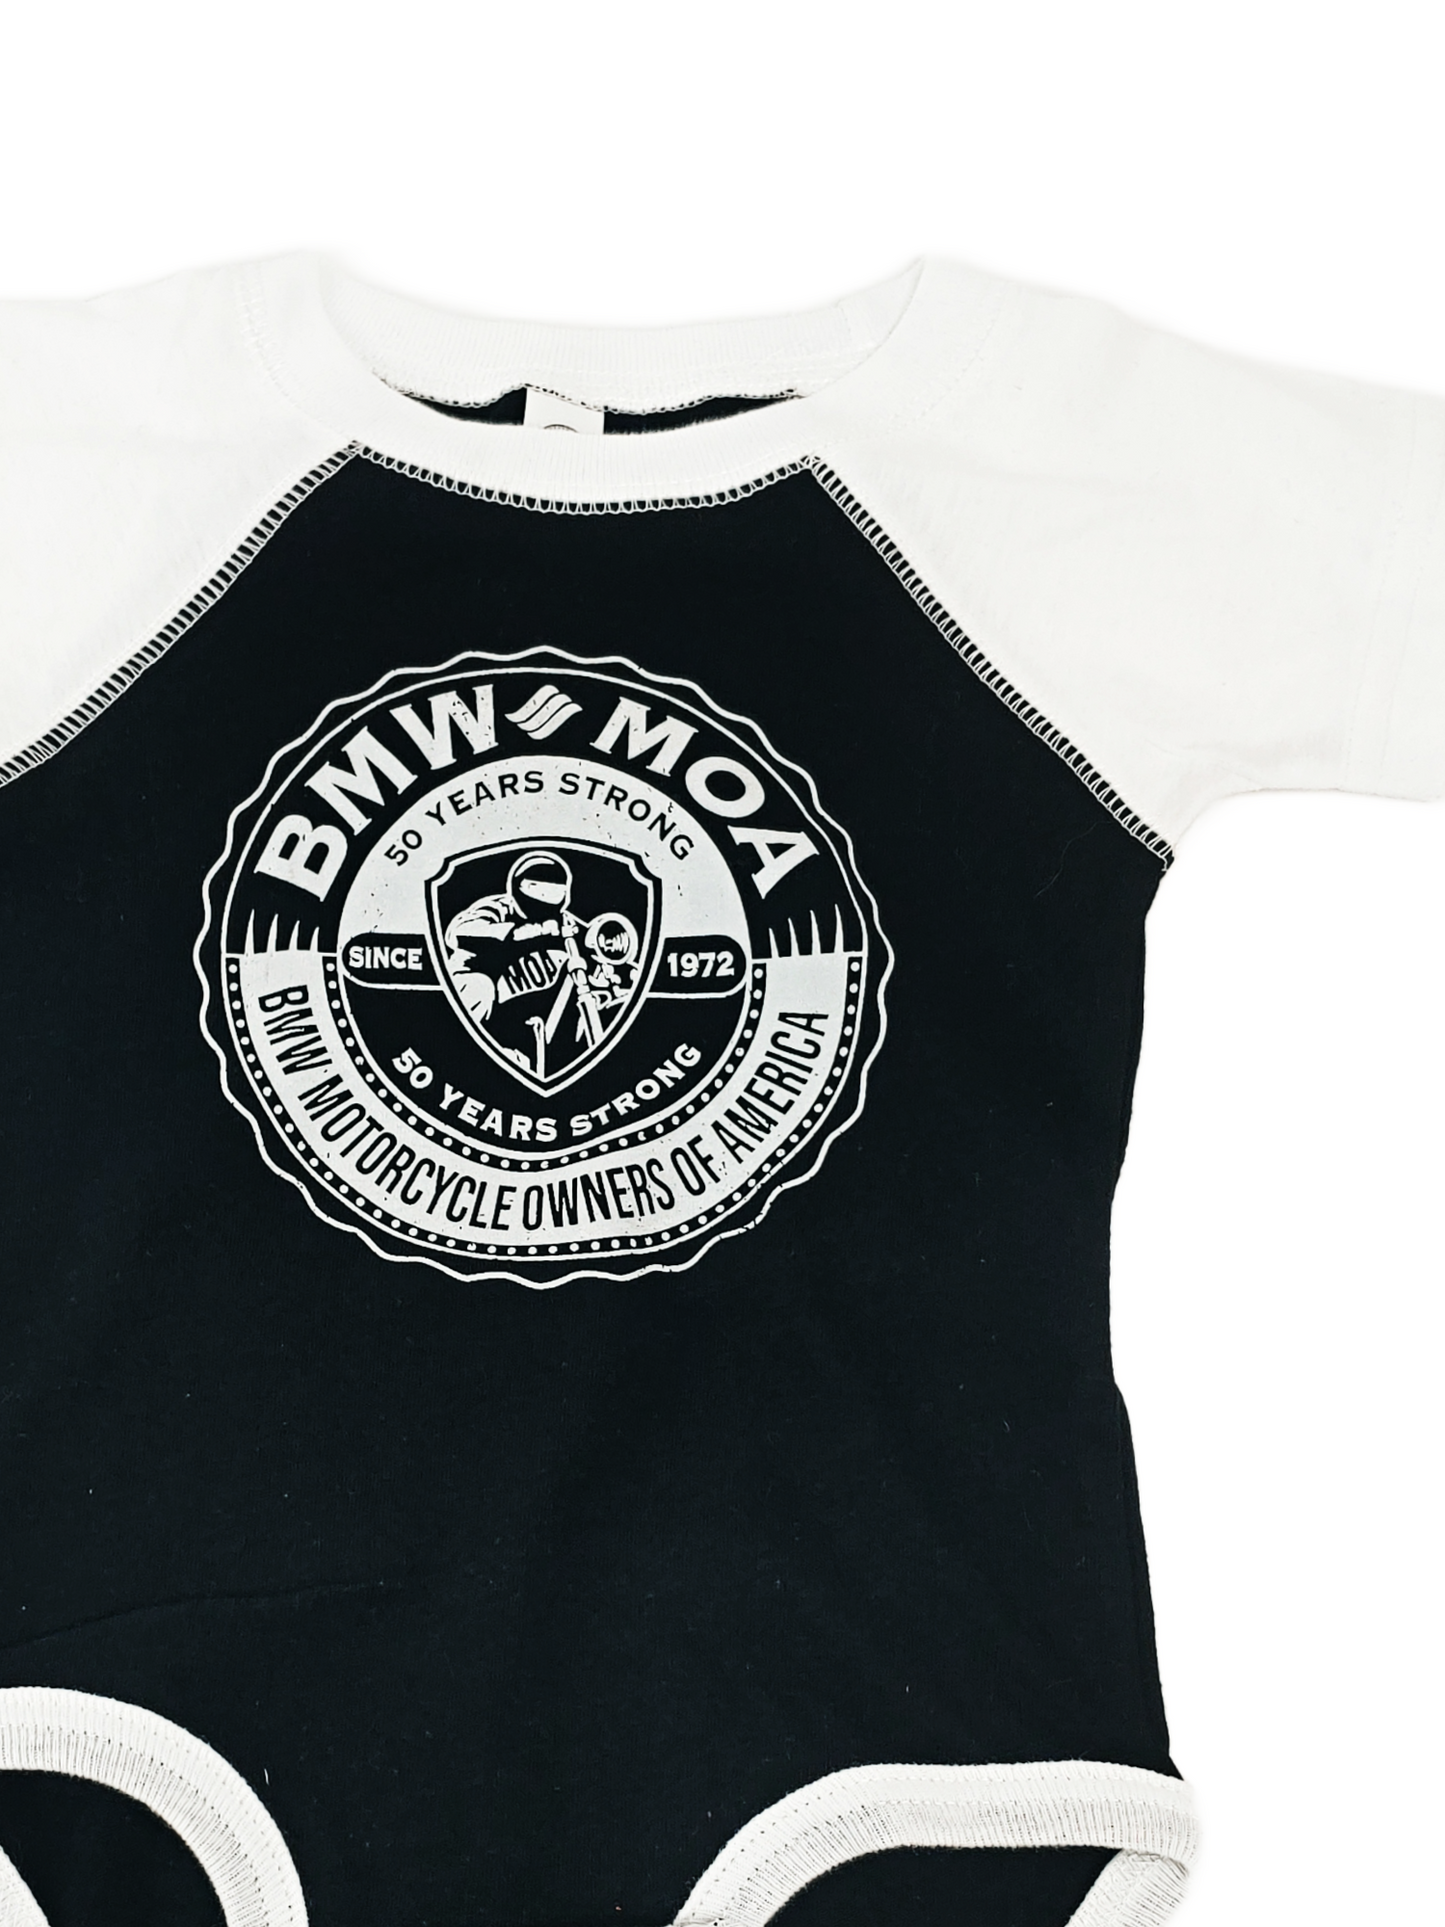 Future BMW Motorcycle Owner of America - Limited Edition Baby Onesie